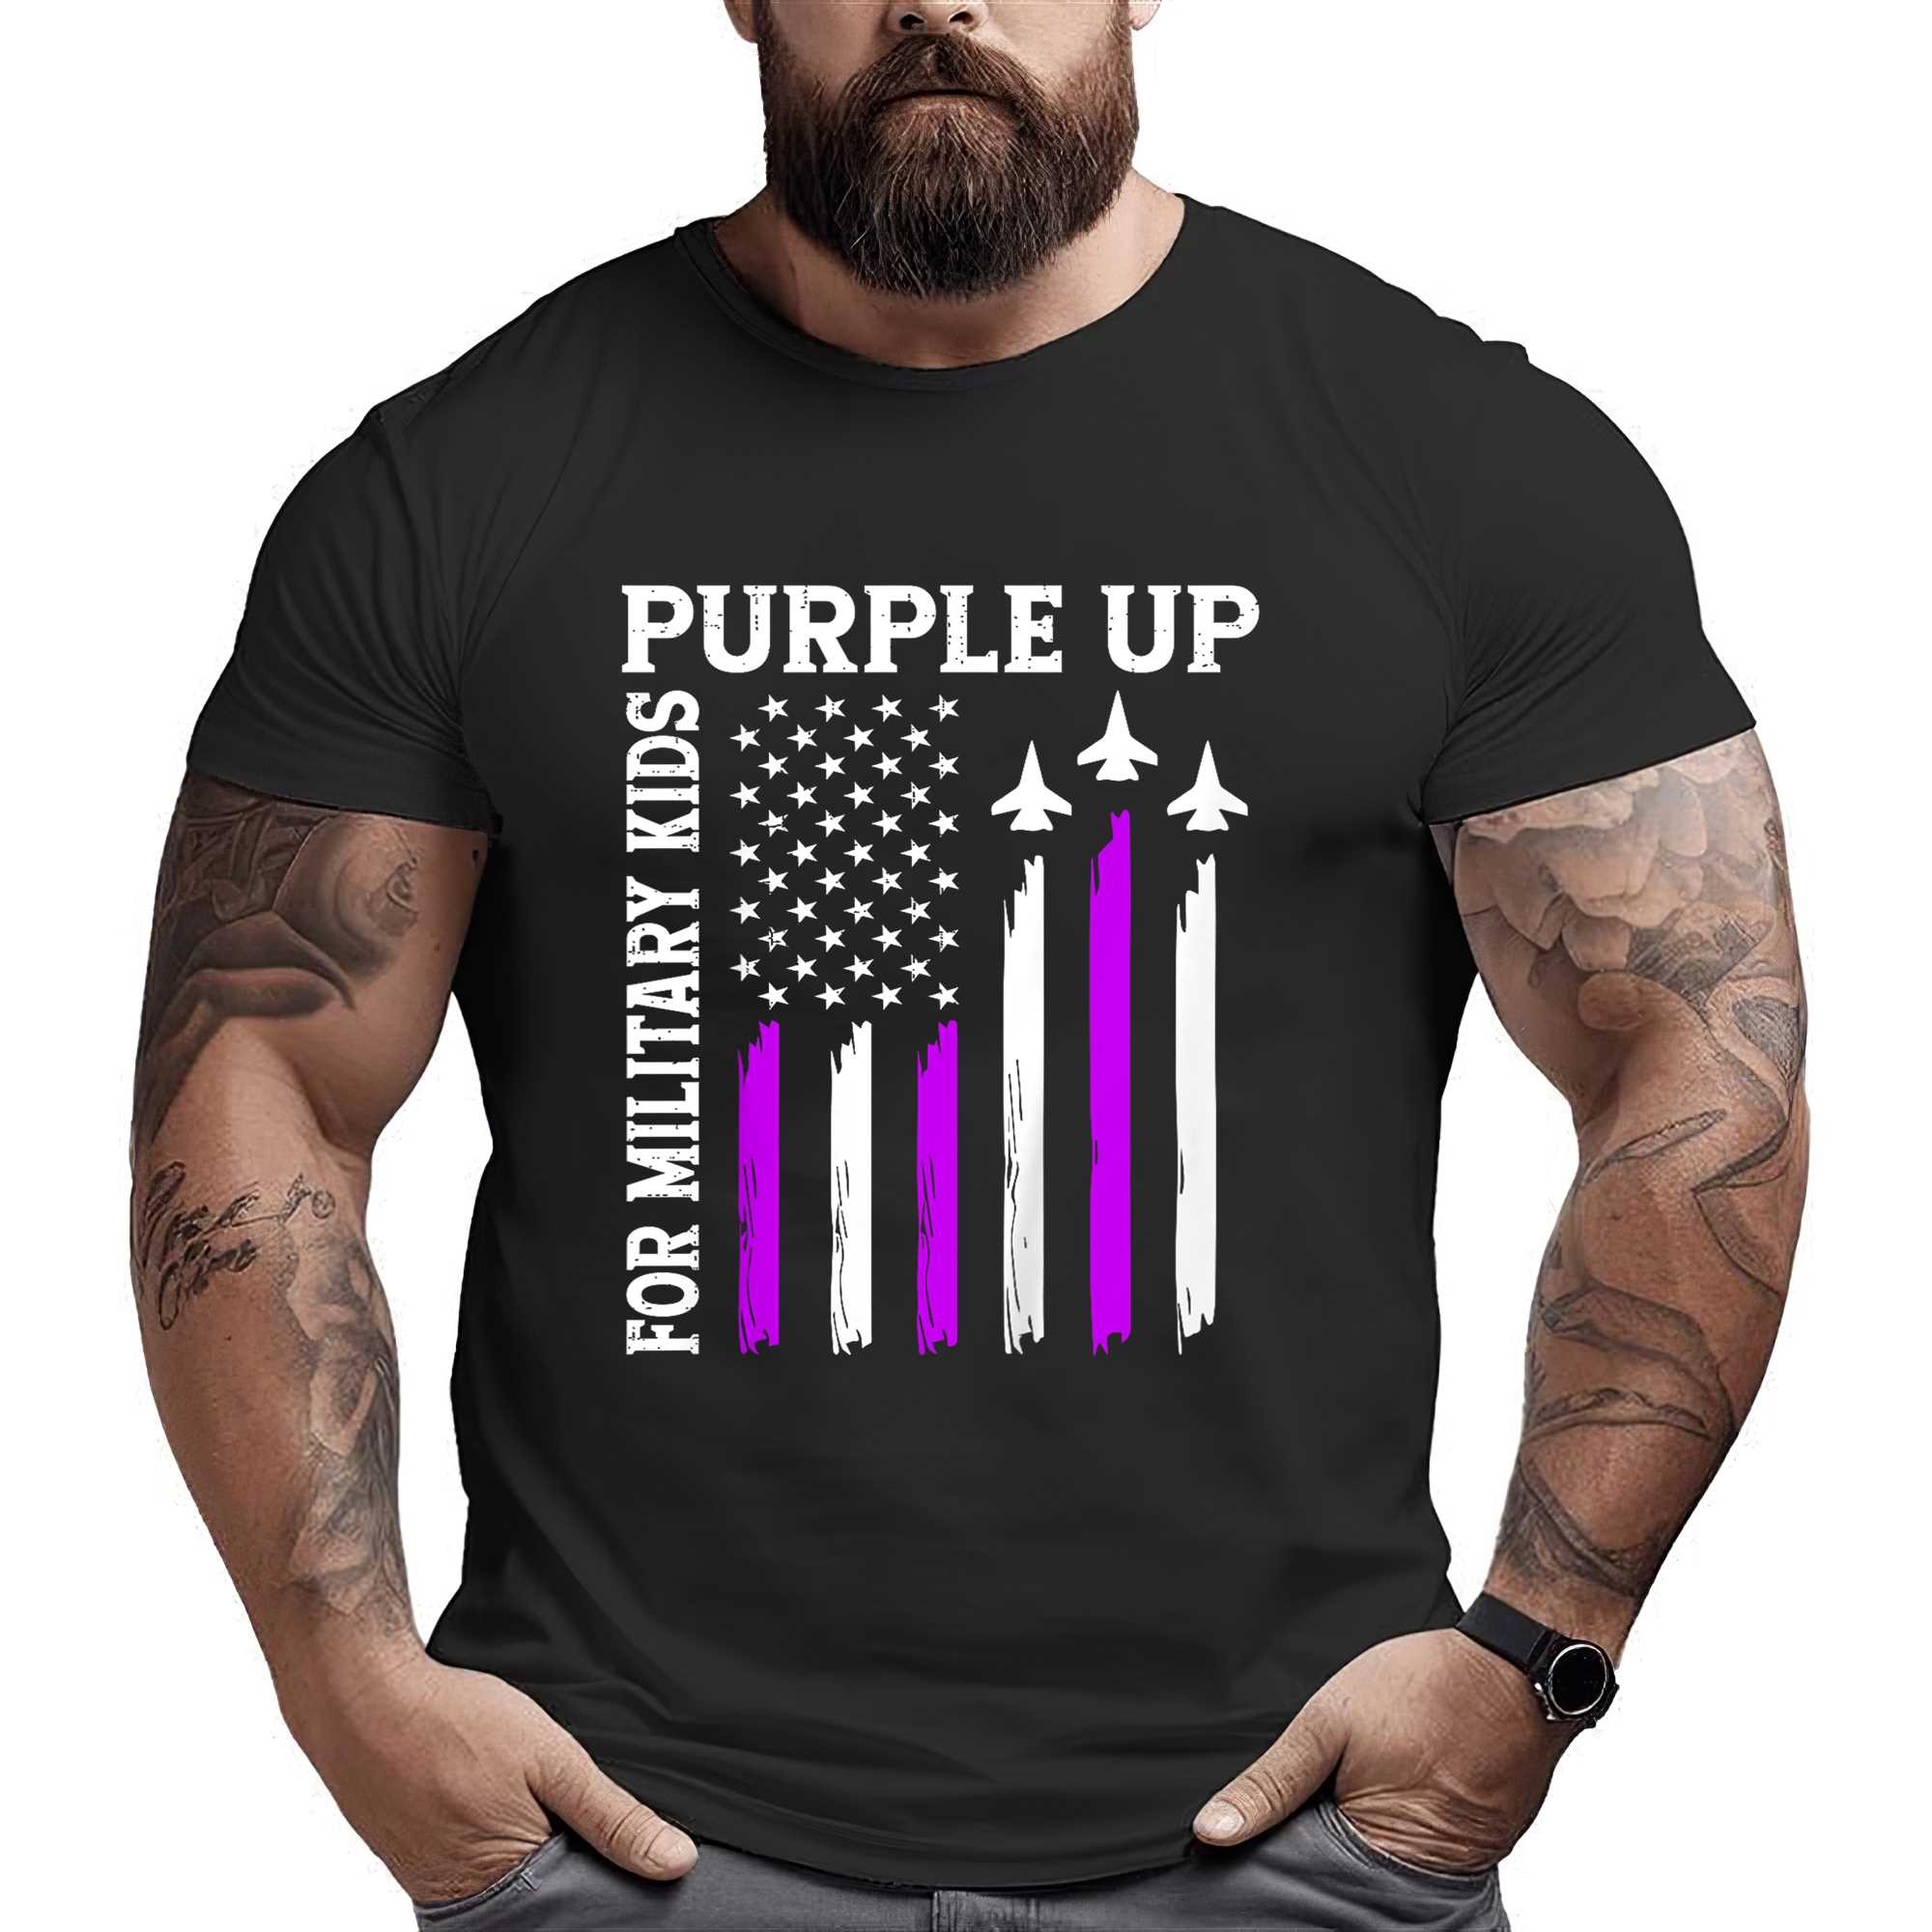 Purple Up For Military Kids Military Child Month Air Force T-shirt